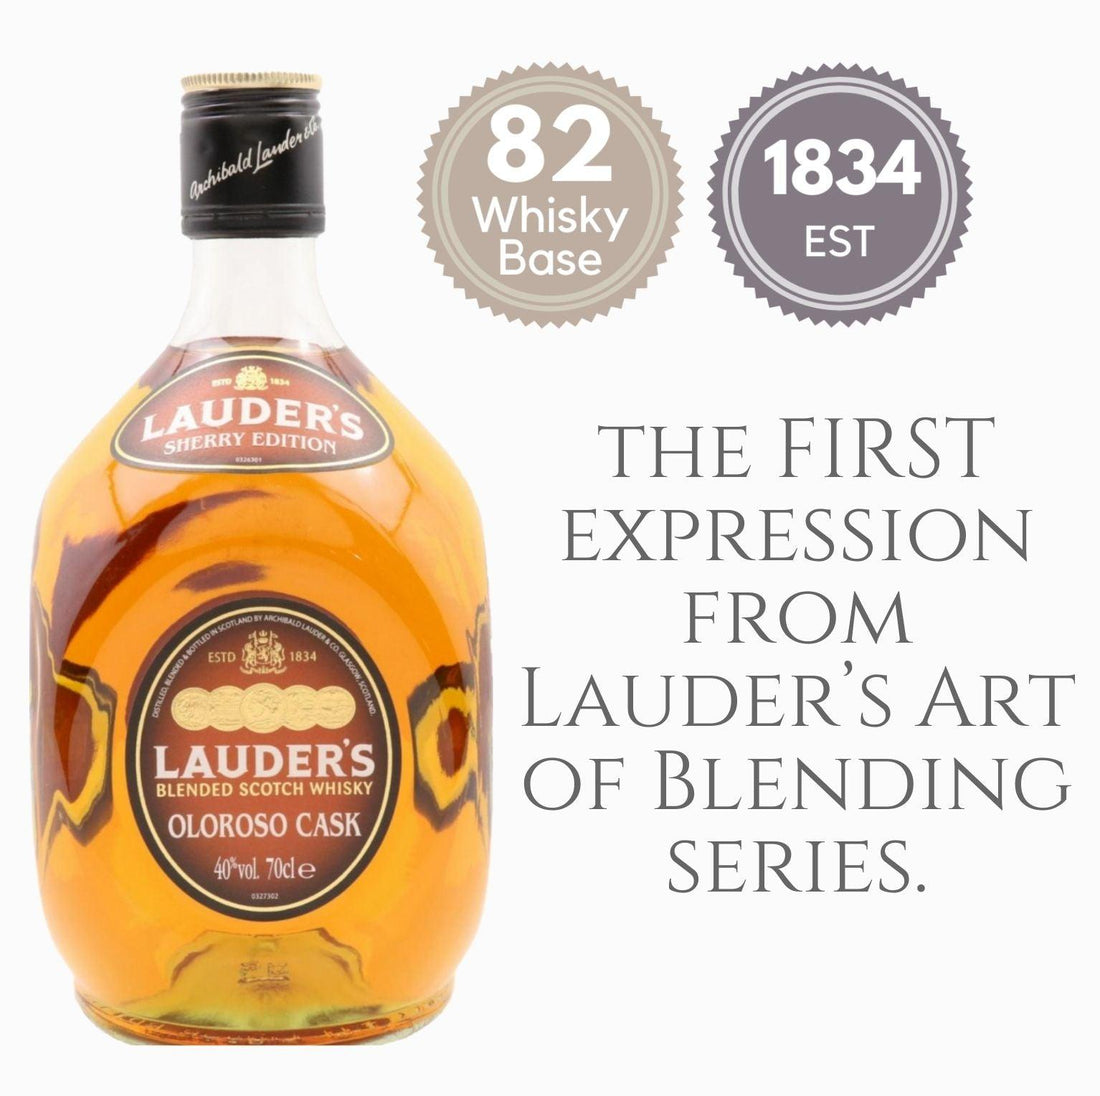 Lauder's Sherry Edition Whisky from Scotland